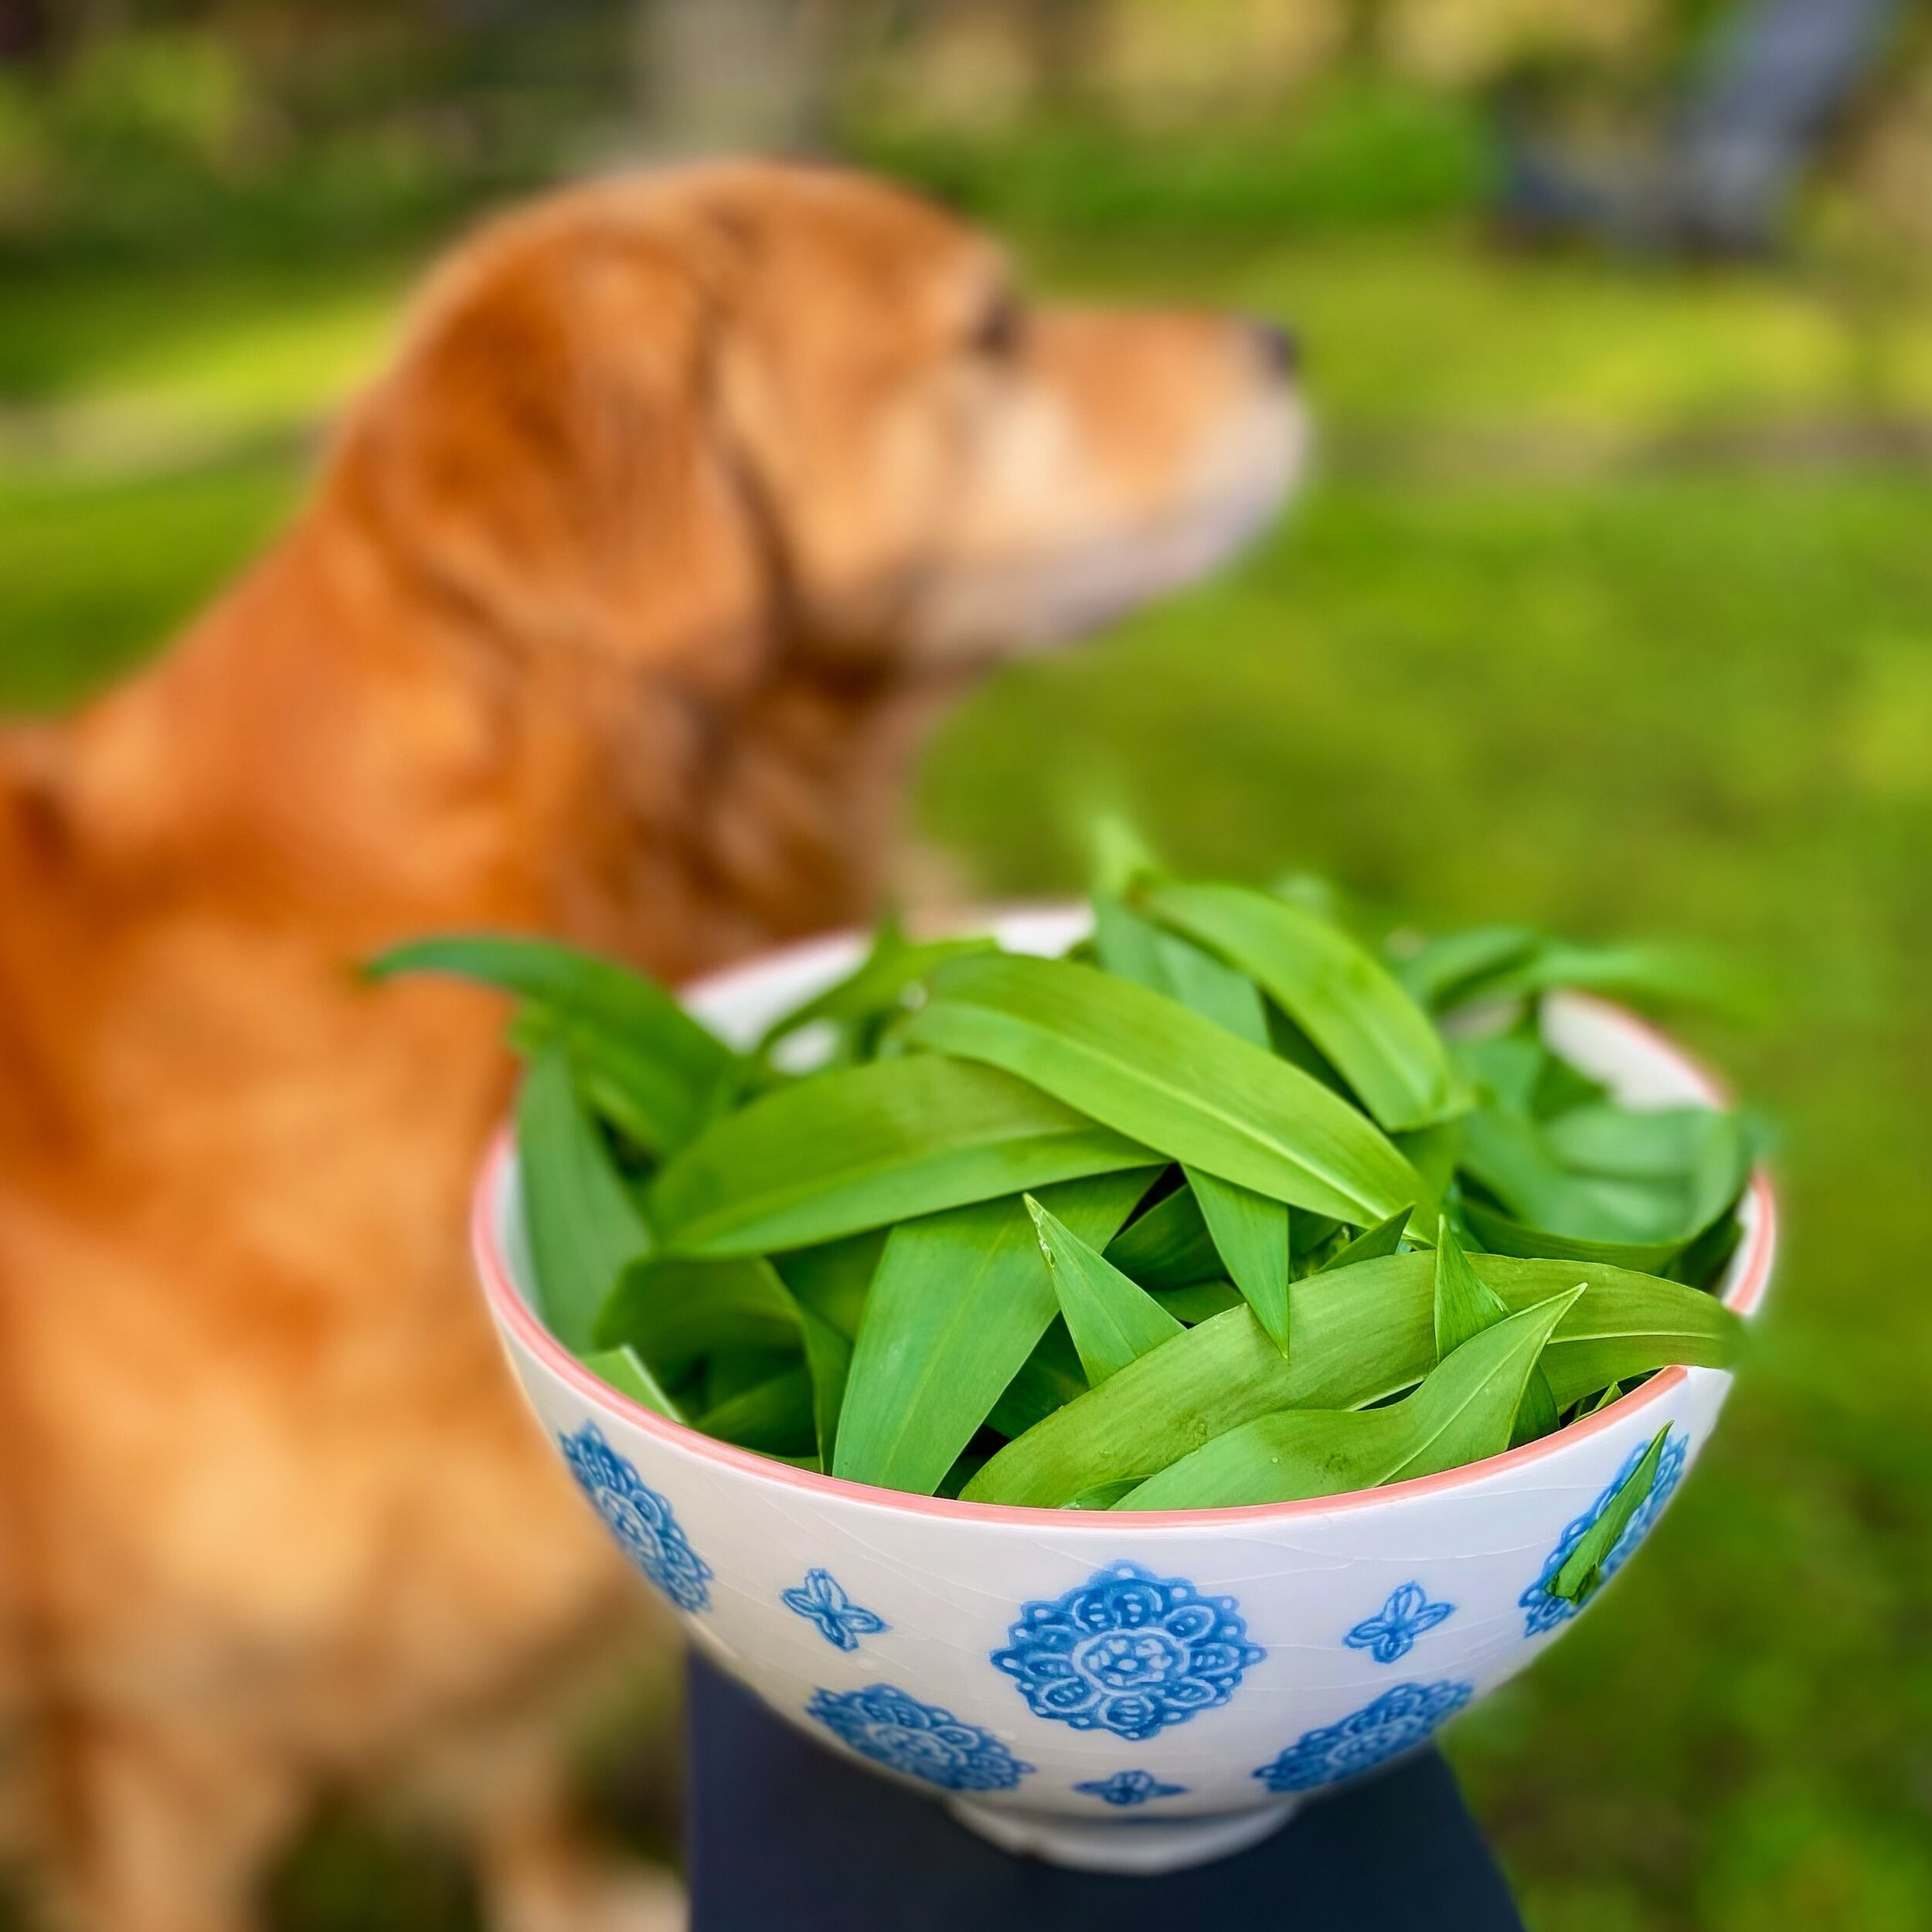 Picking wild garlic in the garden at 7am for today&rsquo;s omelette special&hellip; with a little help of course!!! 🐶🍃